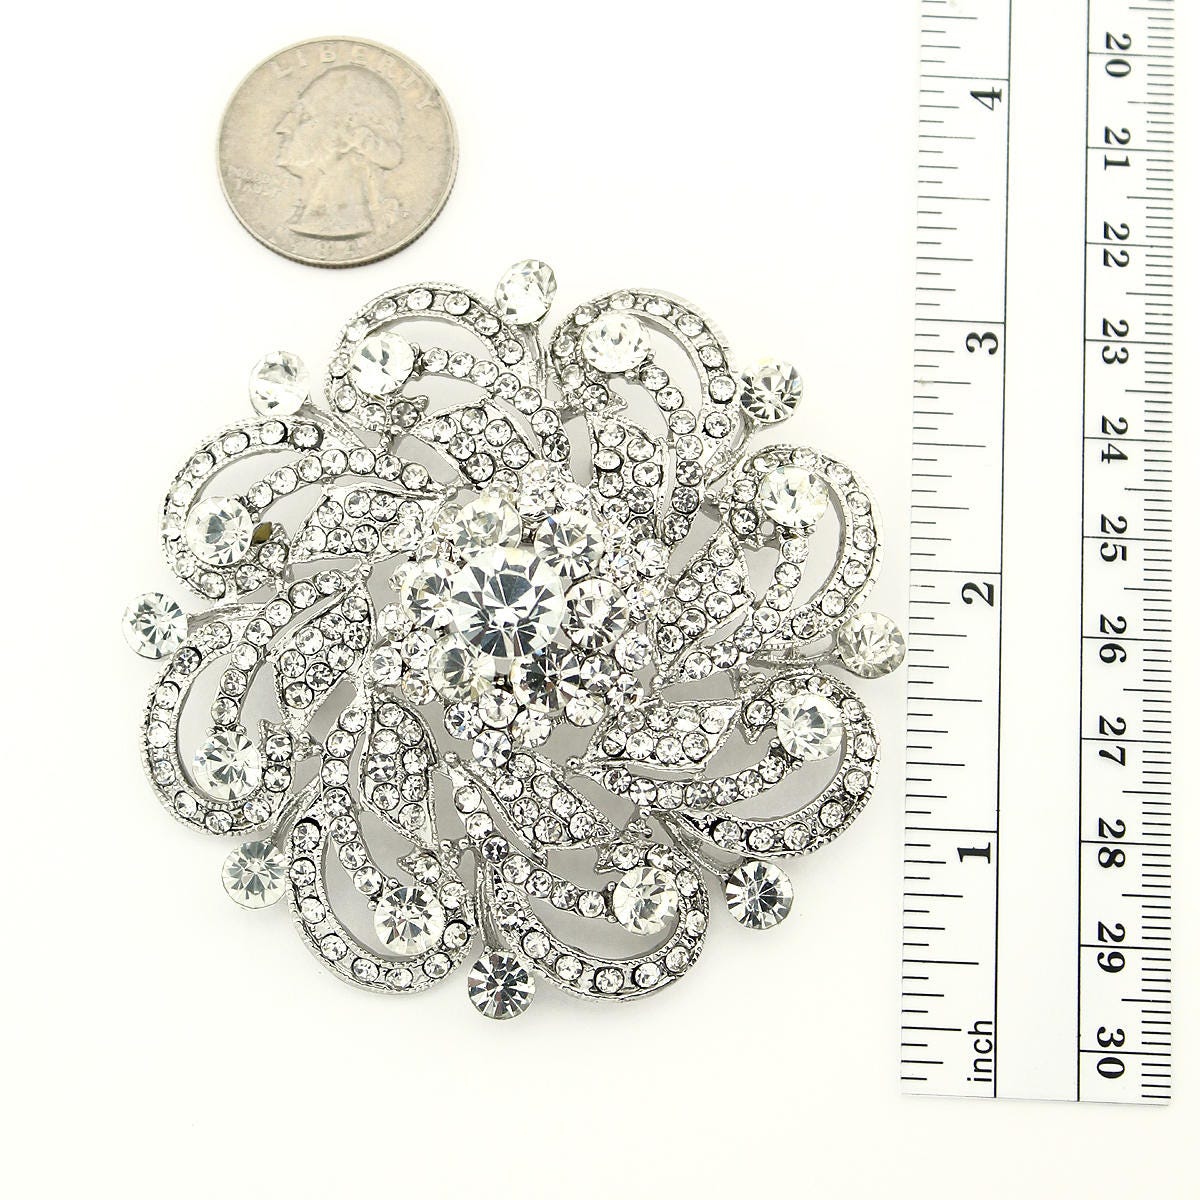 Women Rhinestone 3 Circle Brooch Scarf Buckle Simple Style Wedding Bouquet  Vintage Wedding Hijab Scarf Pin Up Buckle Broches From Lakesuperior, $1.23